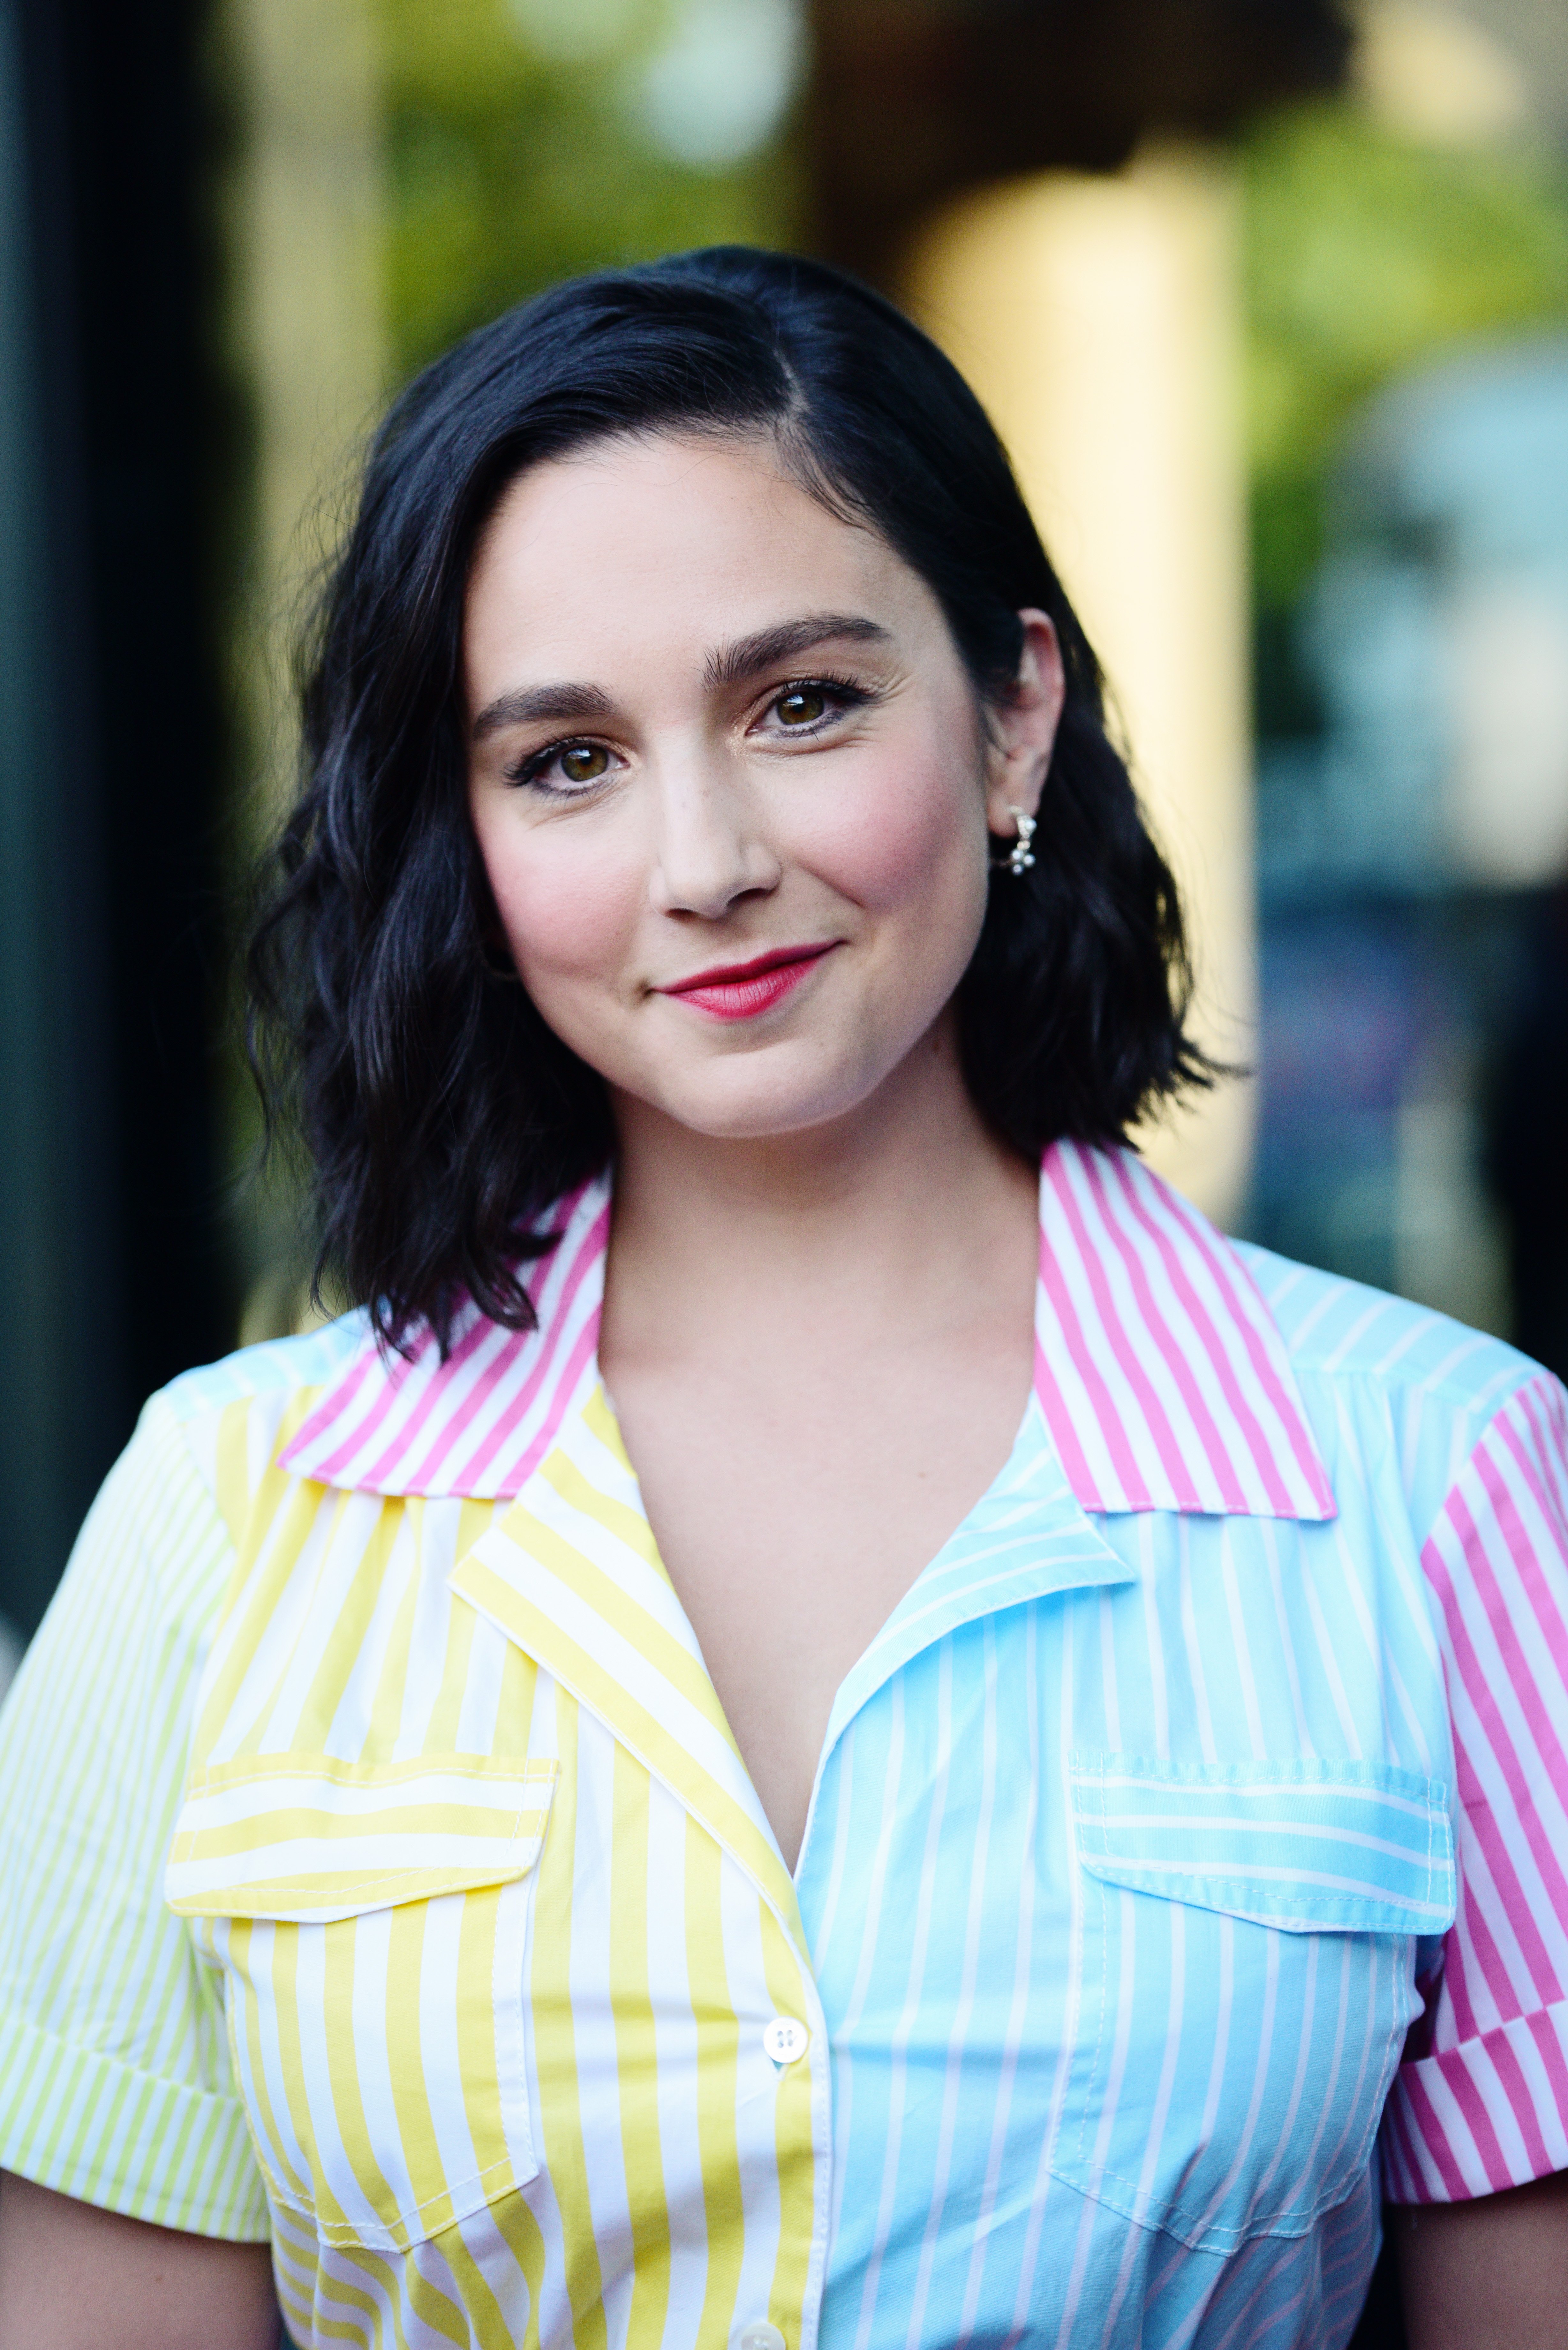 Molly Ephraim attends "A League Of Their Own" screening & panel discussion at Outfest at DGA Theater Complex on July 19, 2022 in Los Angeles, California. | Source: Getty Images